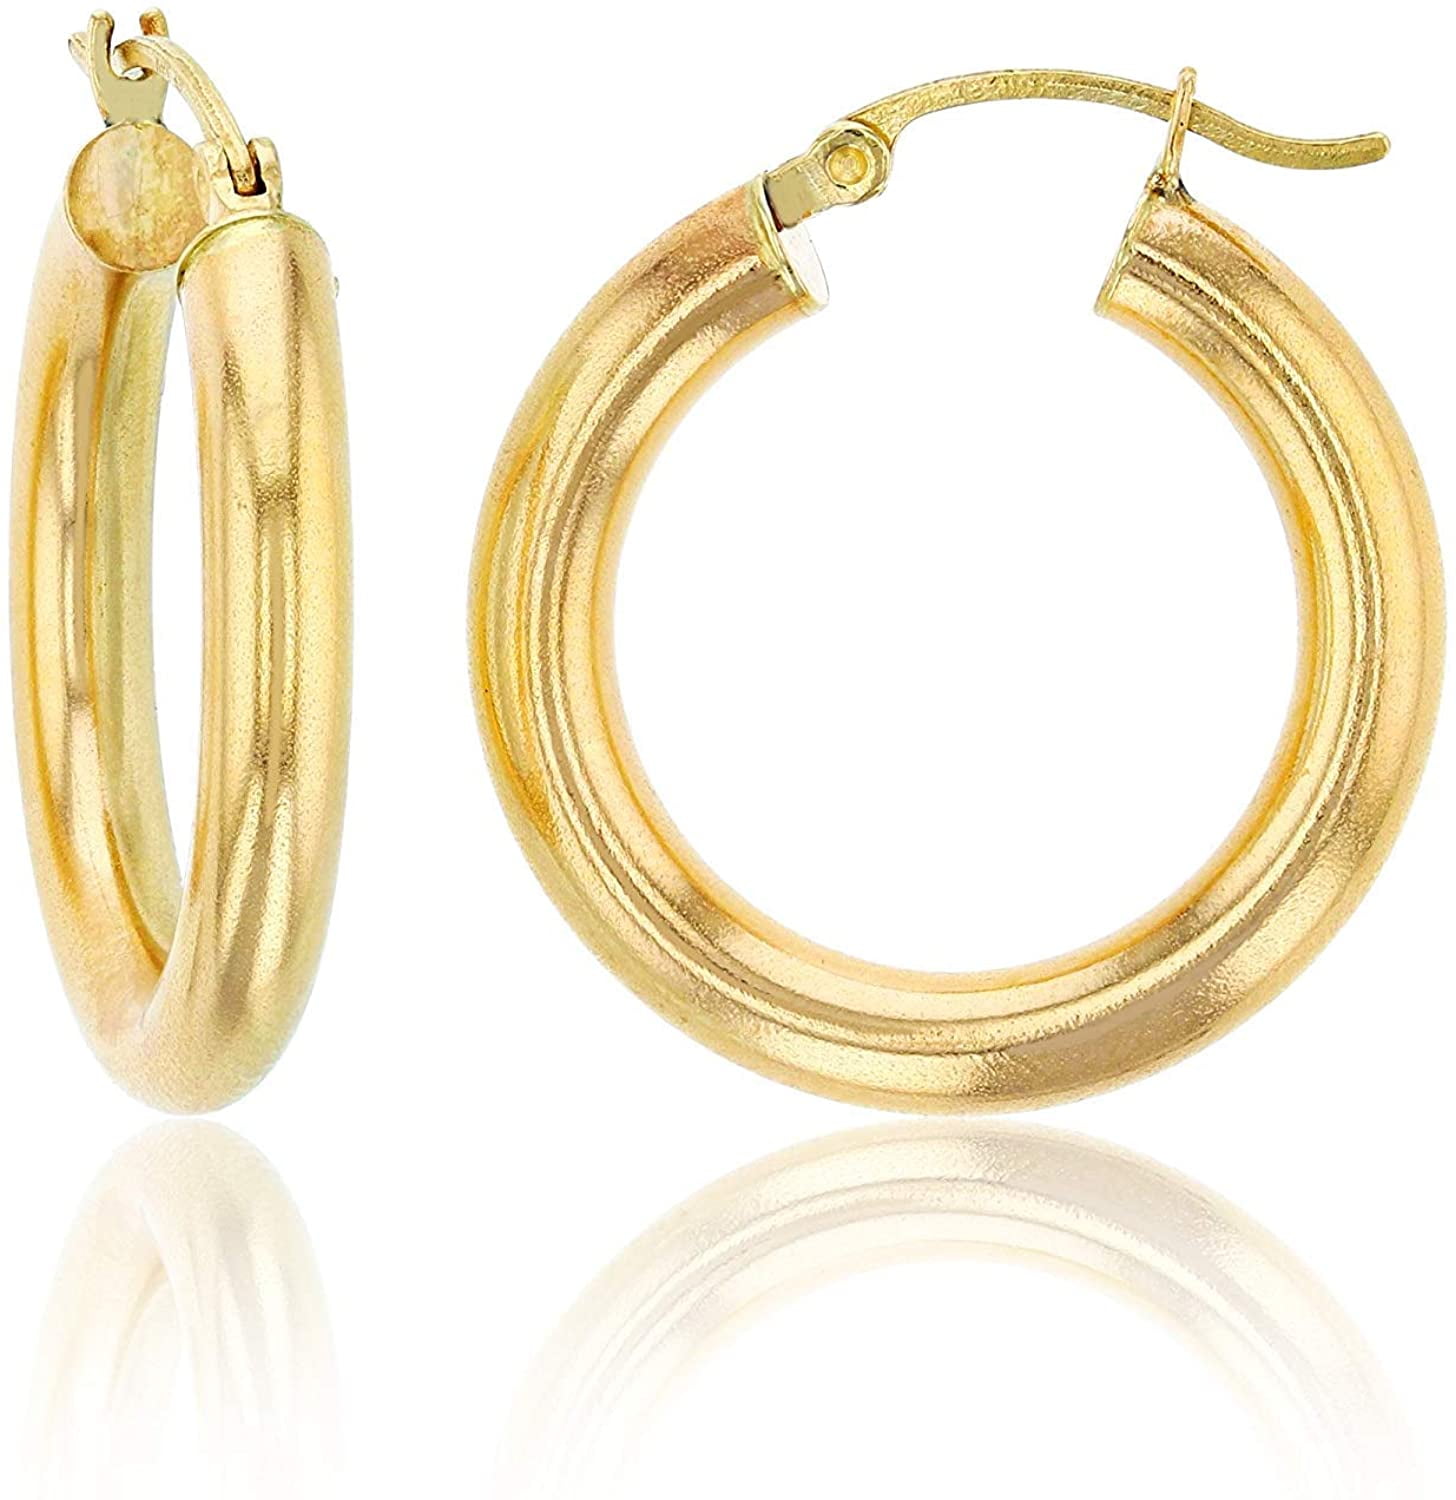 Next Level Jewelry - 14K Yellow Gold 4MM Polished Round Tube Hoops